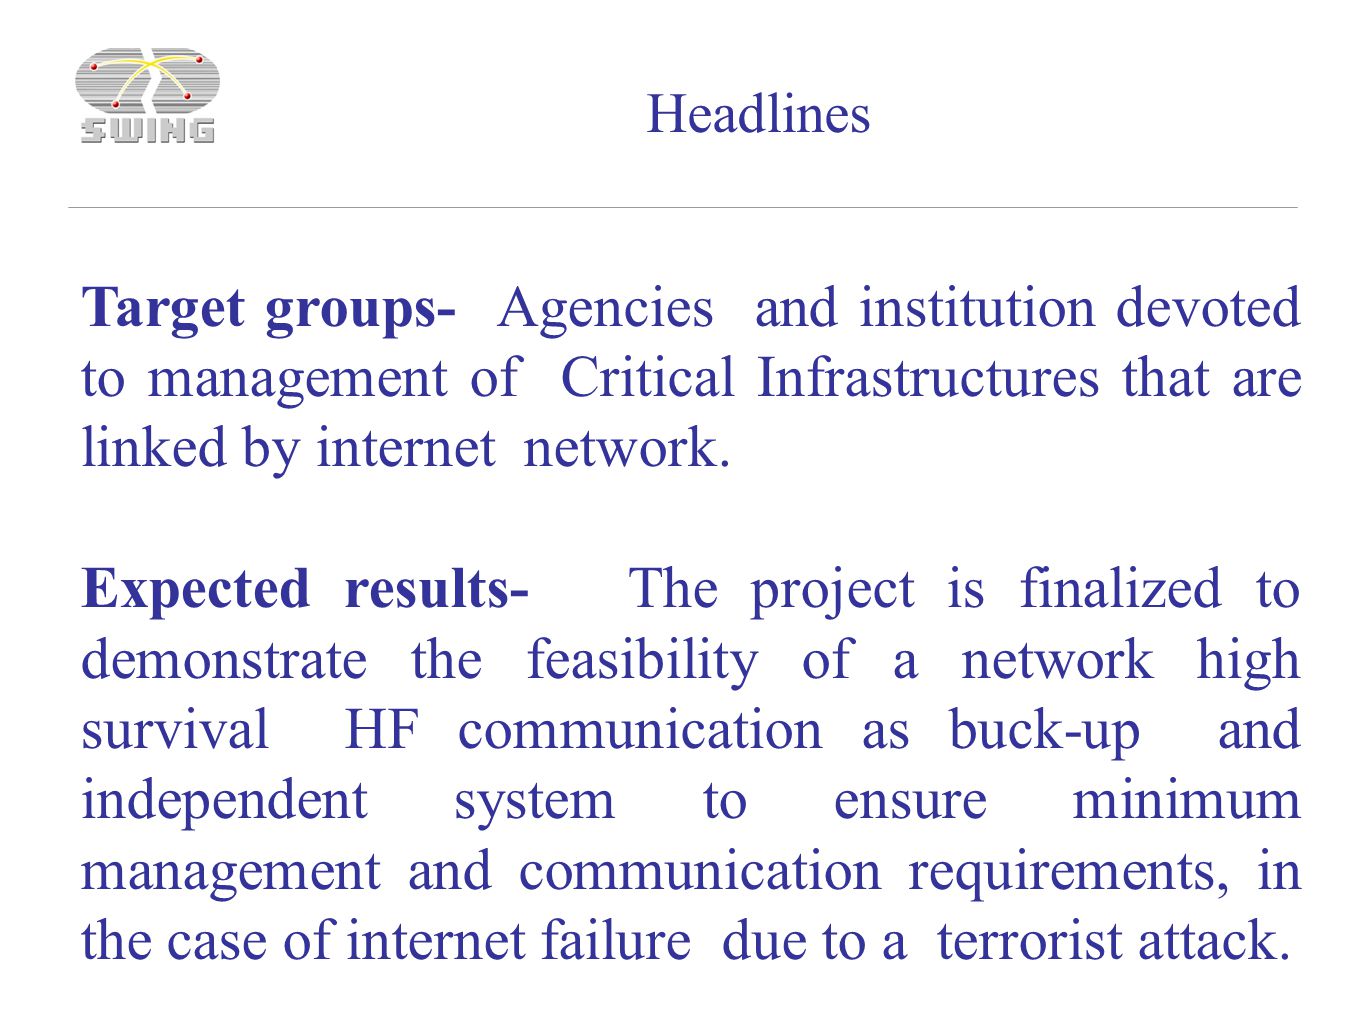 Target groups- Agencies and institution devoted to management of Critical Infrastructures that are linked by internet network.